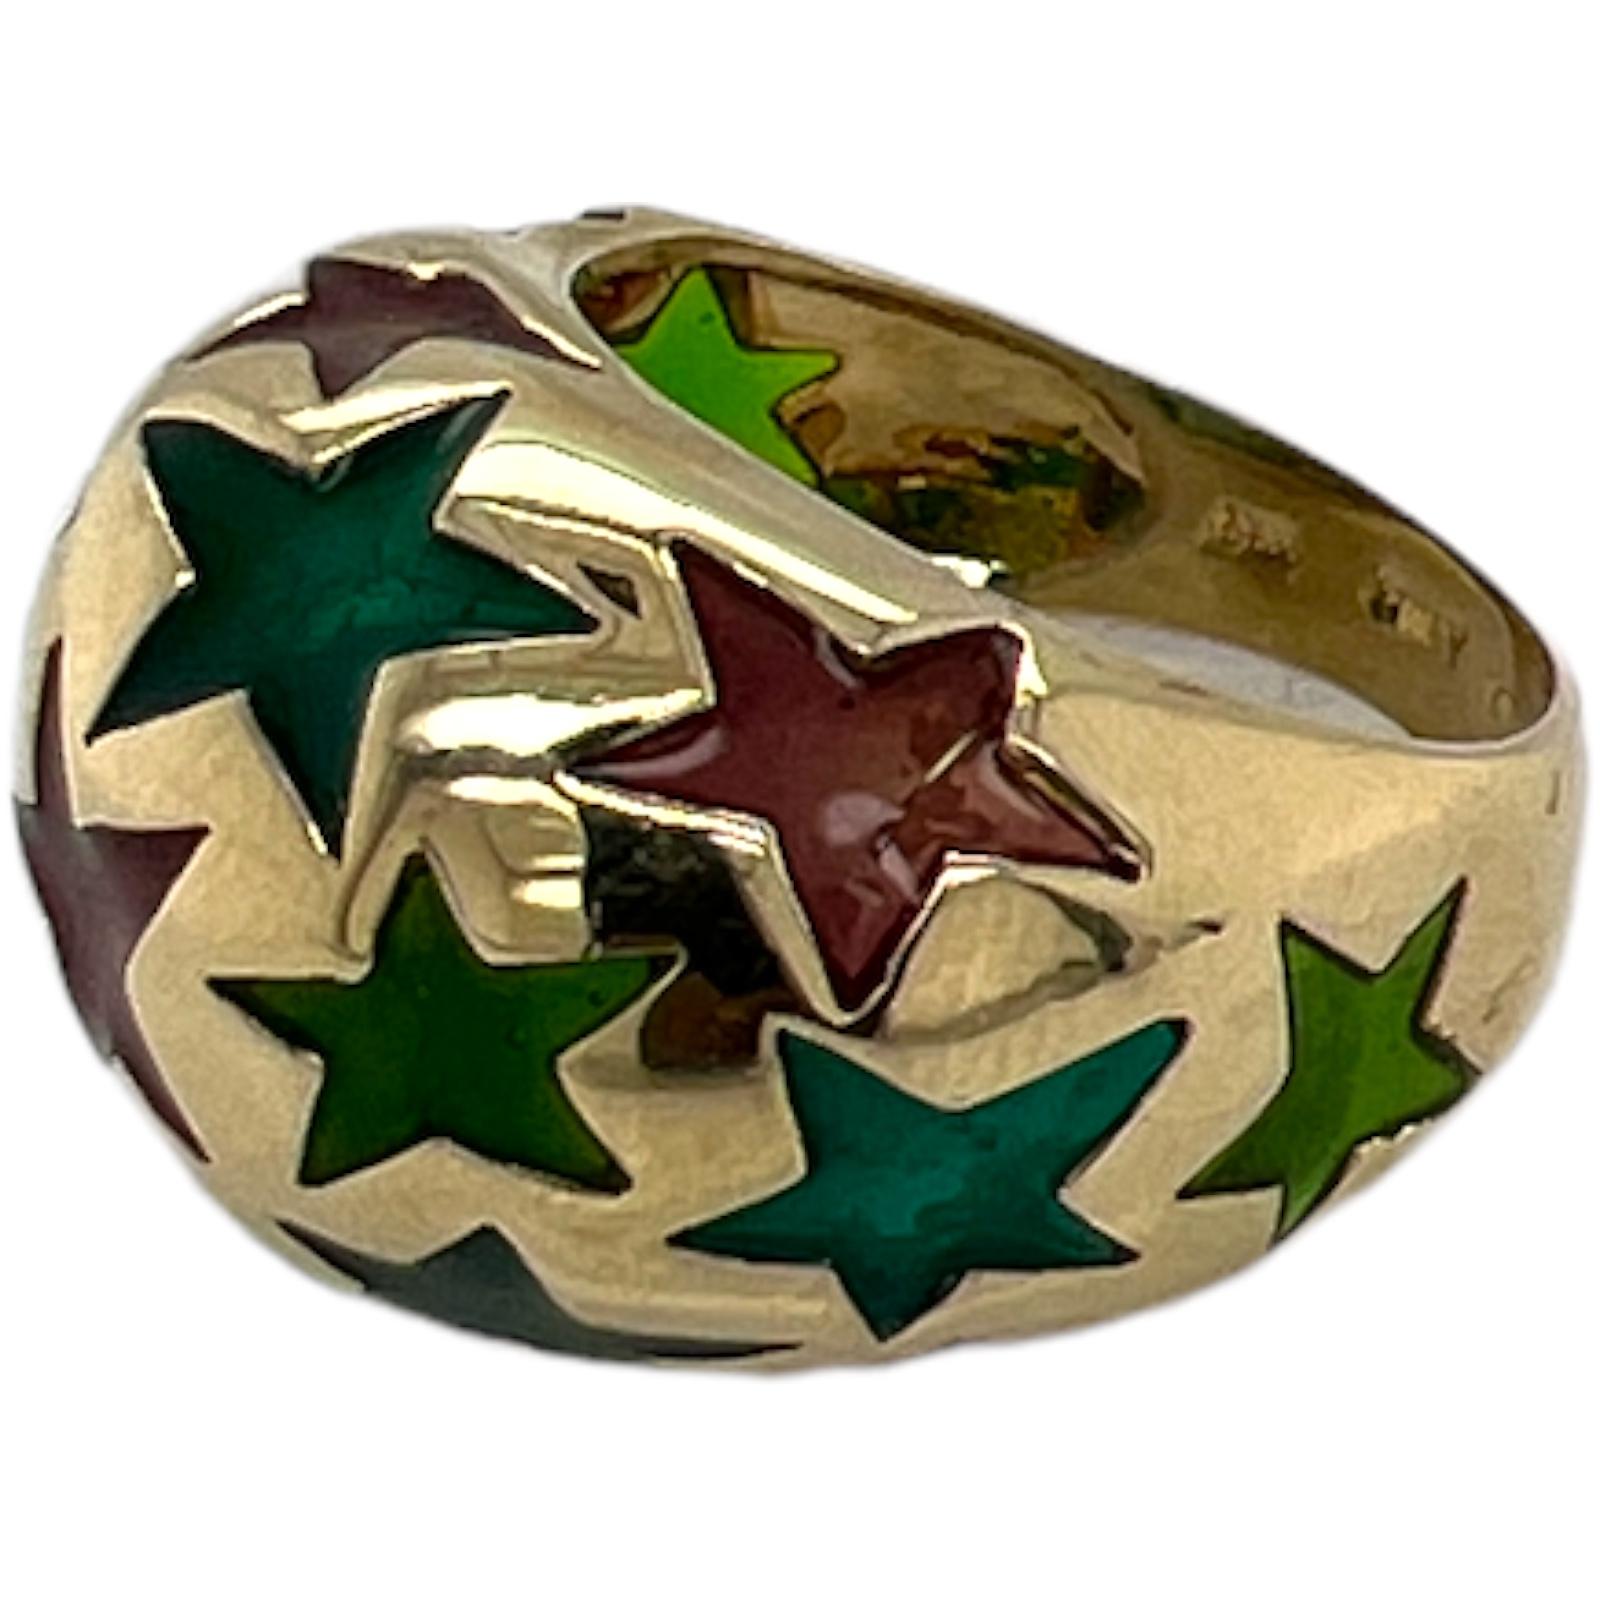 Fabulous vintage enamel dome ring crafted in 14 karat yellow gold. The ring features green, blue, and red enamel stars spread out over the dome of the ring. The ring measures 15mm in width, and is currently size 8.5 (can be sized). 